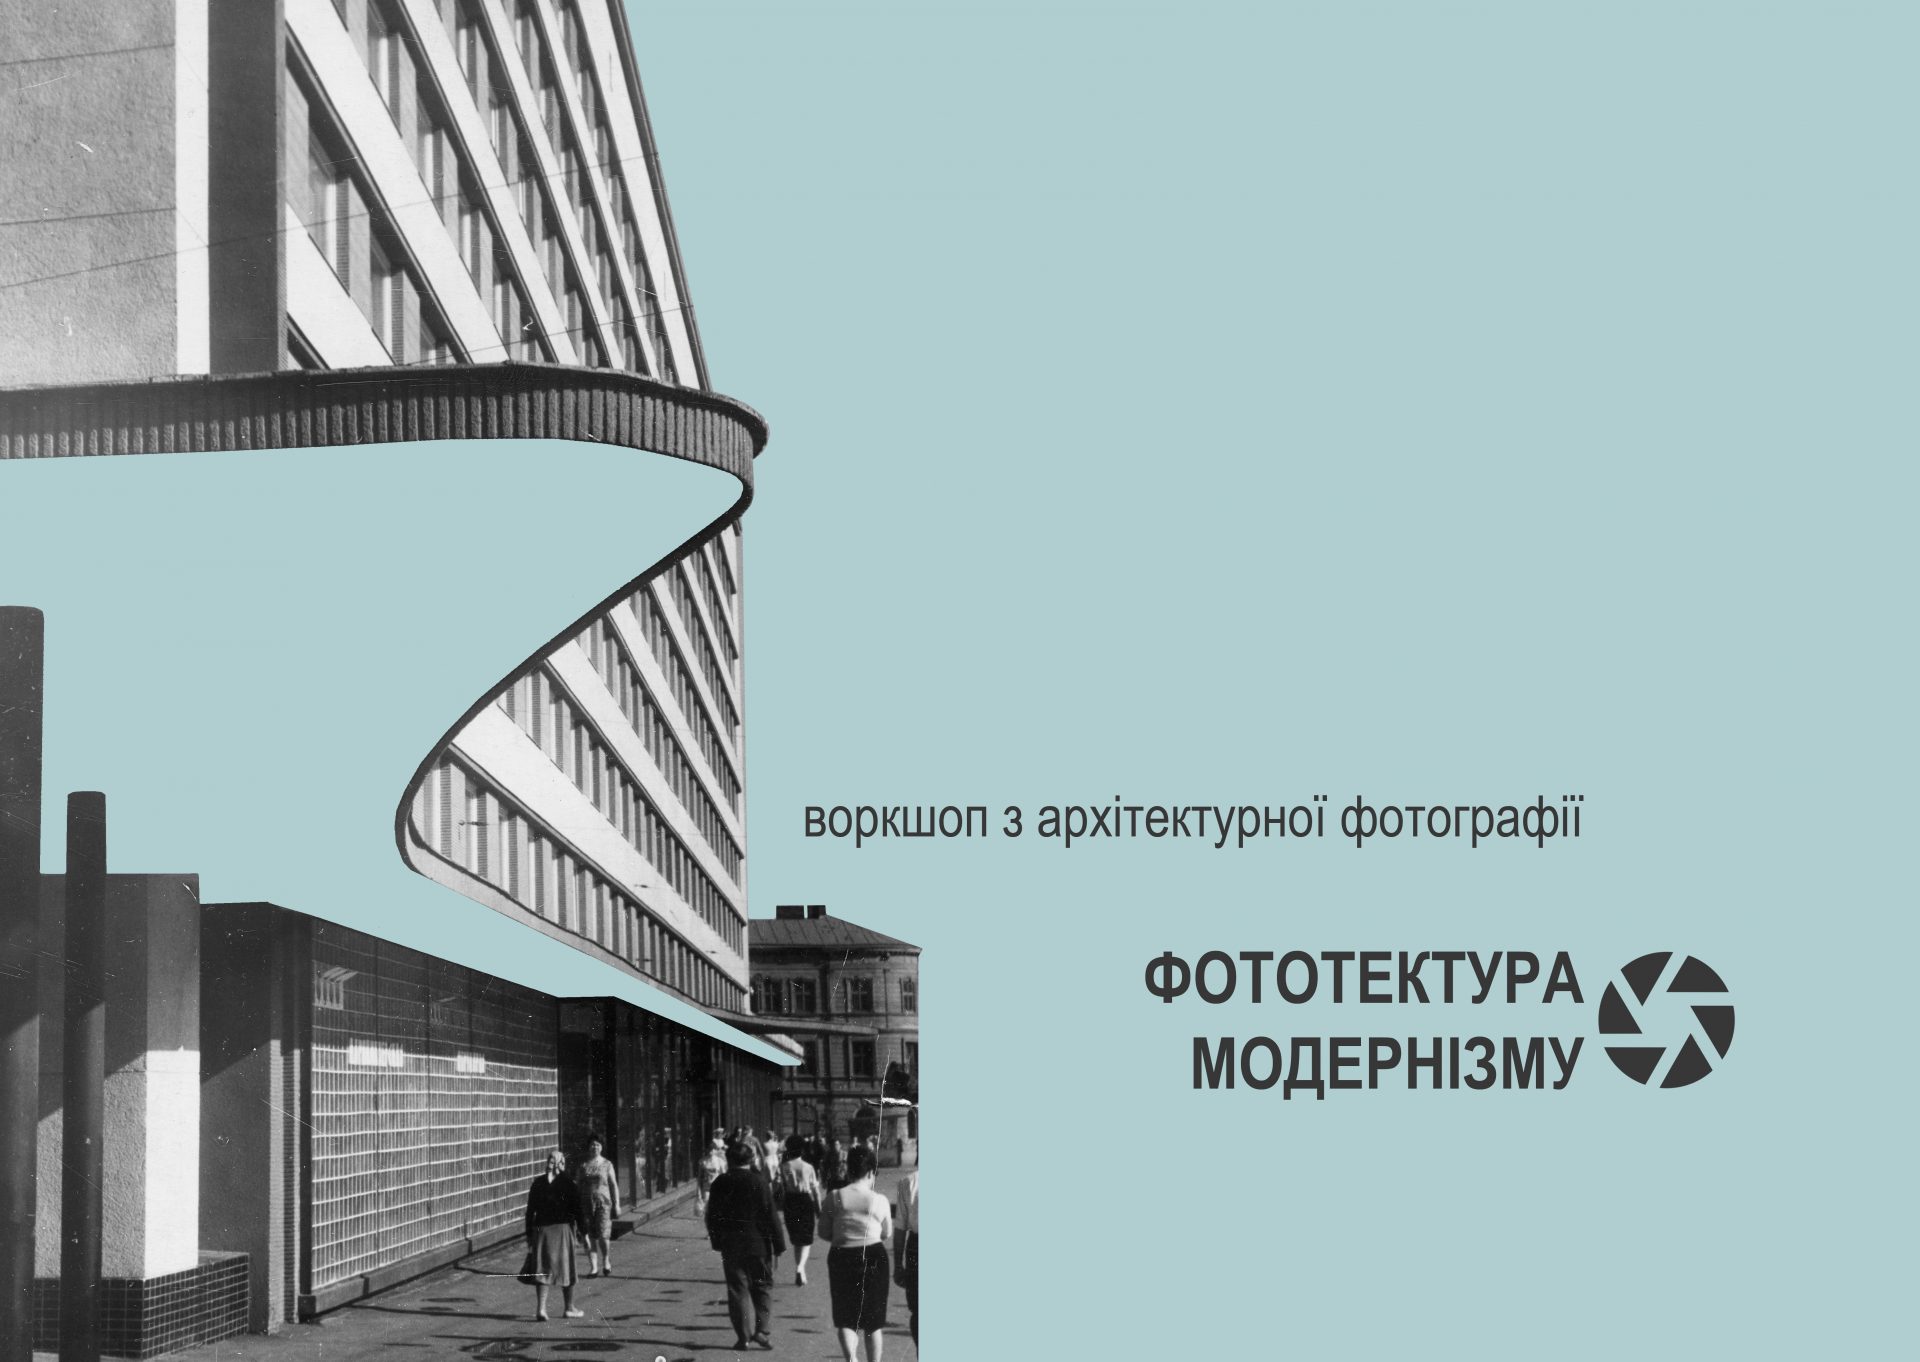 Phototecture of Modernism